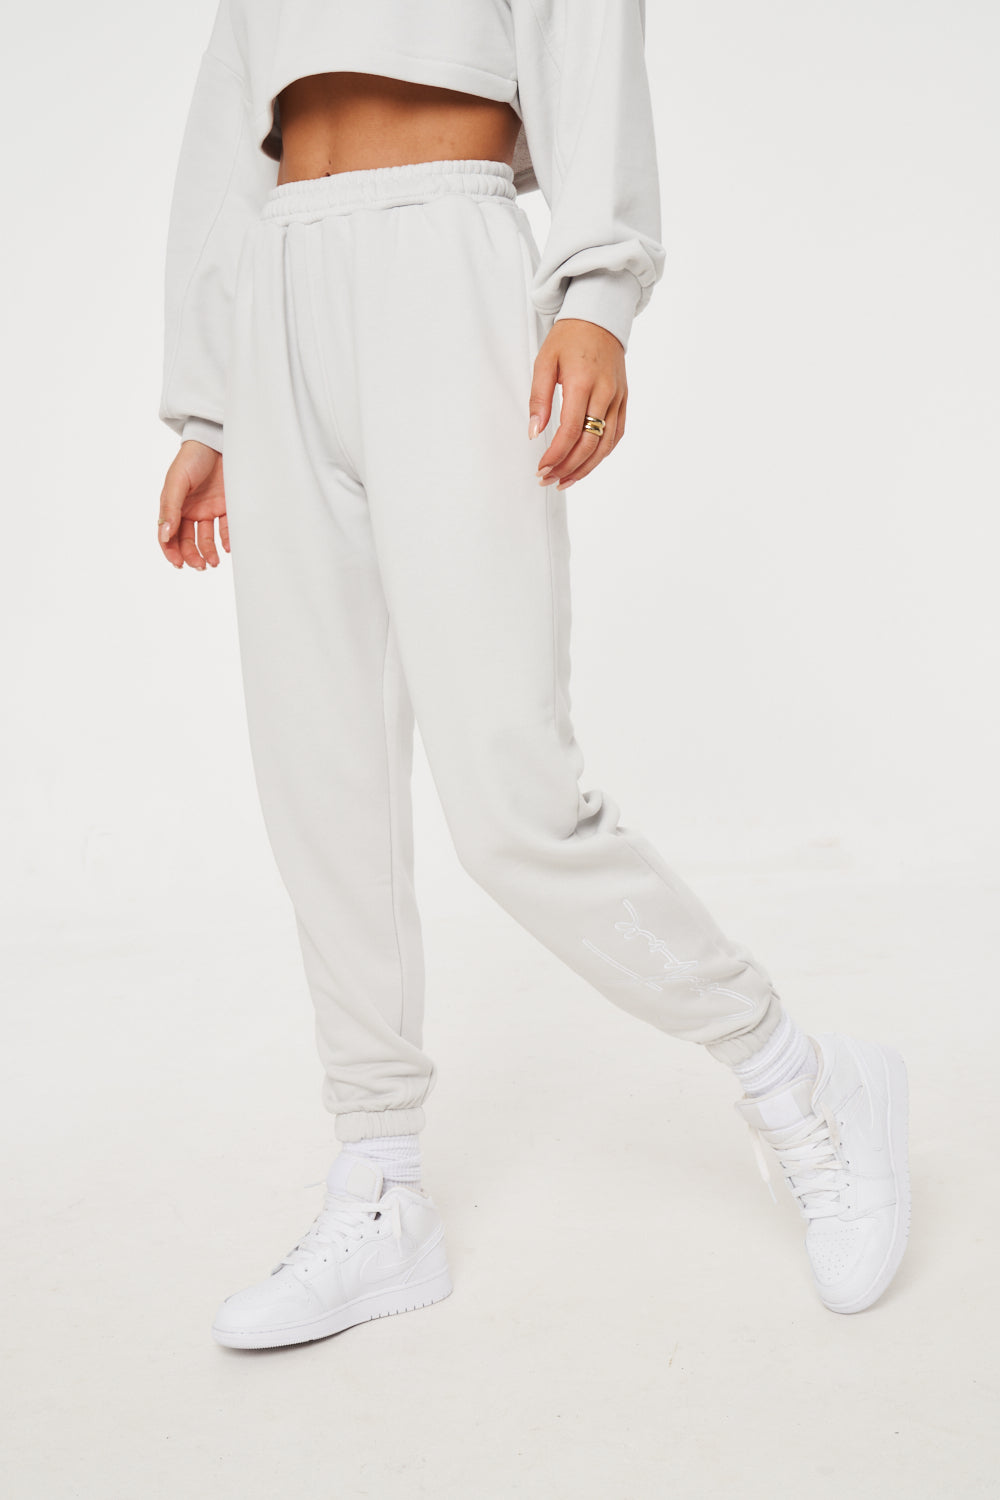 WOMEN'S TRACKSUITS – The Couture Club